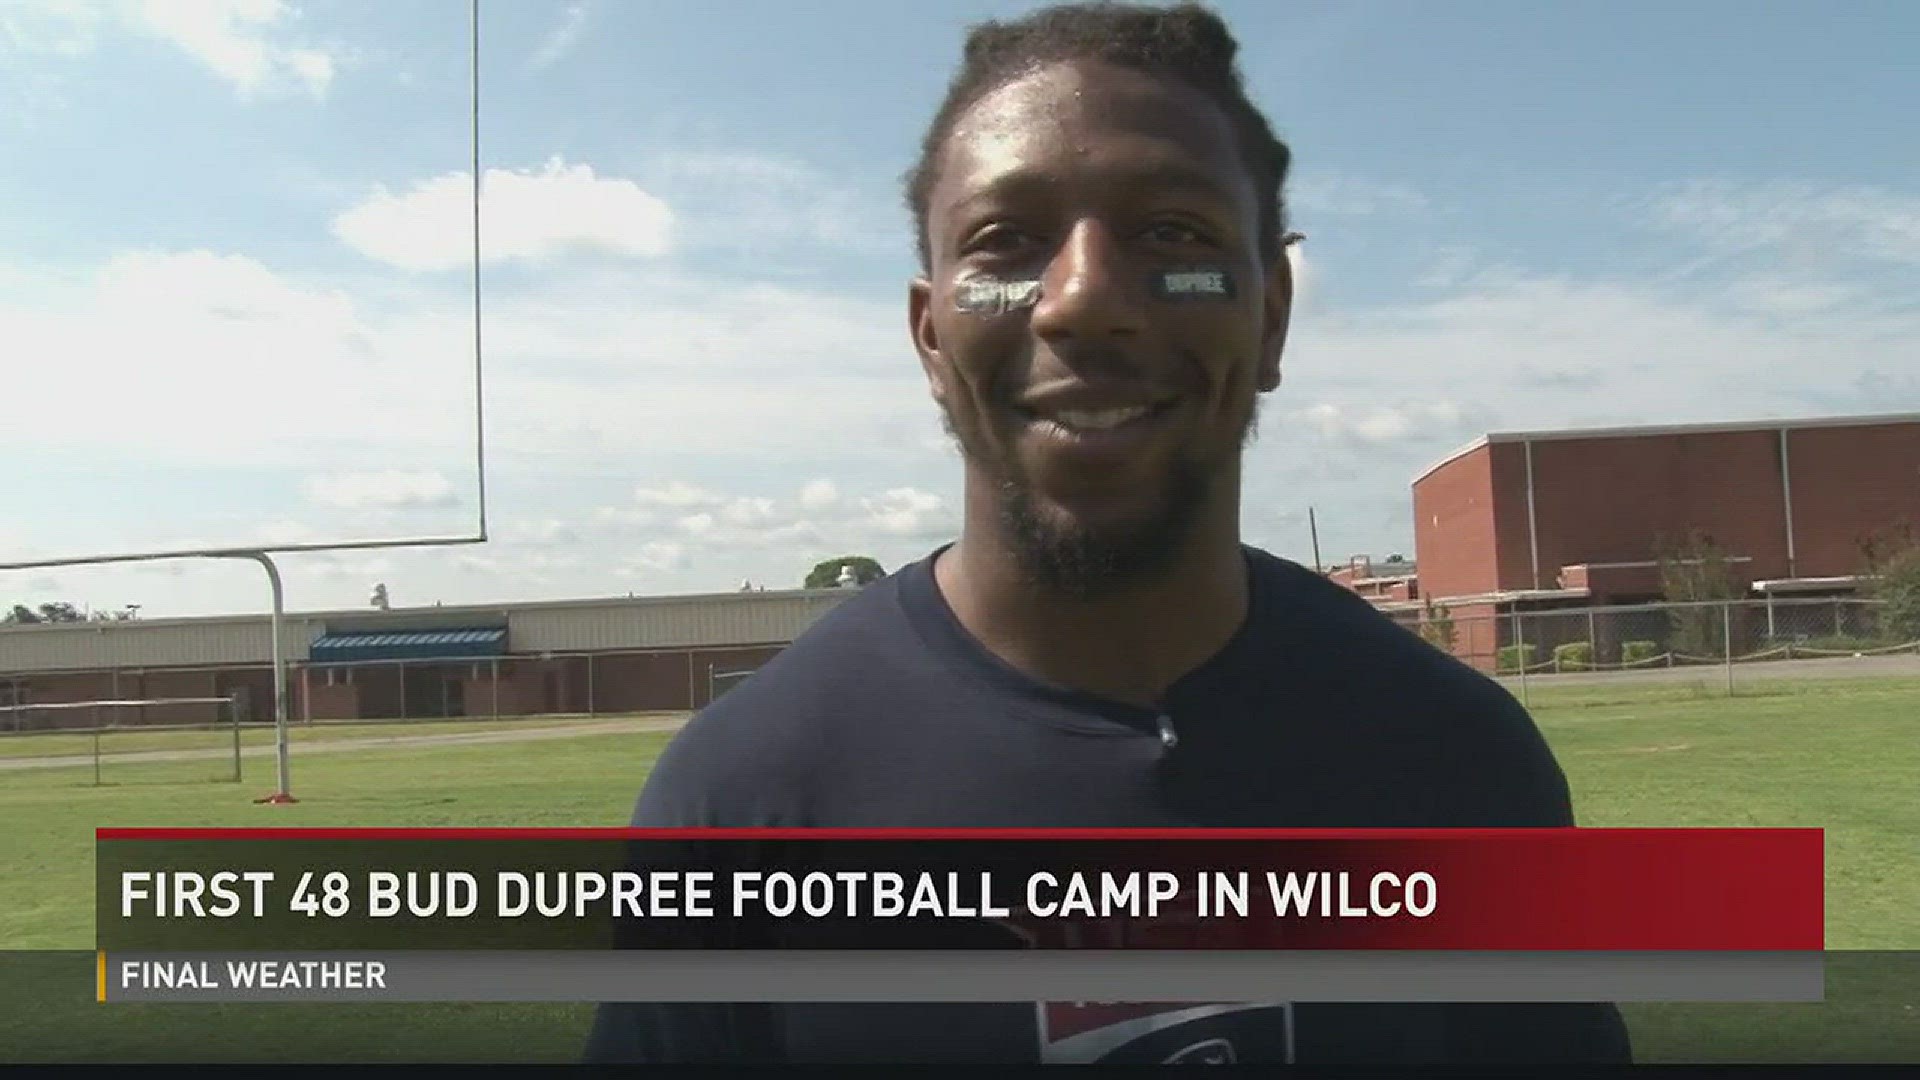 First 48 Bud Dupree football camp in Wilkinson County